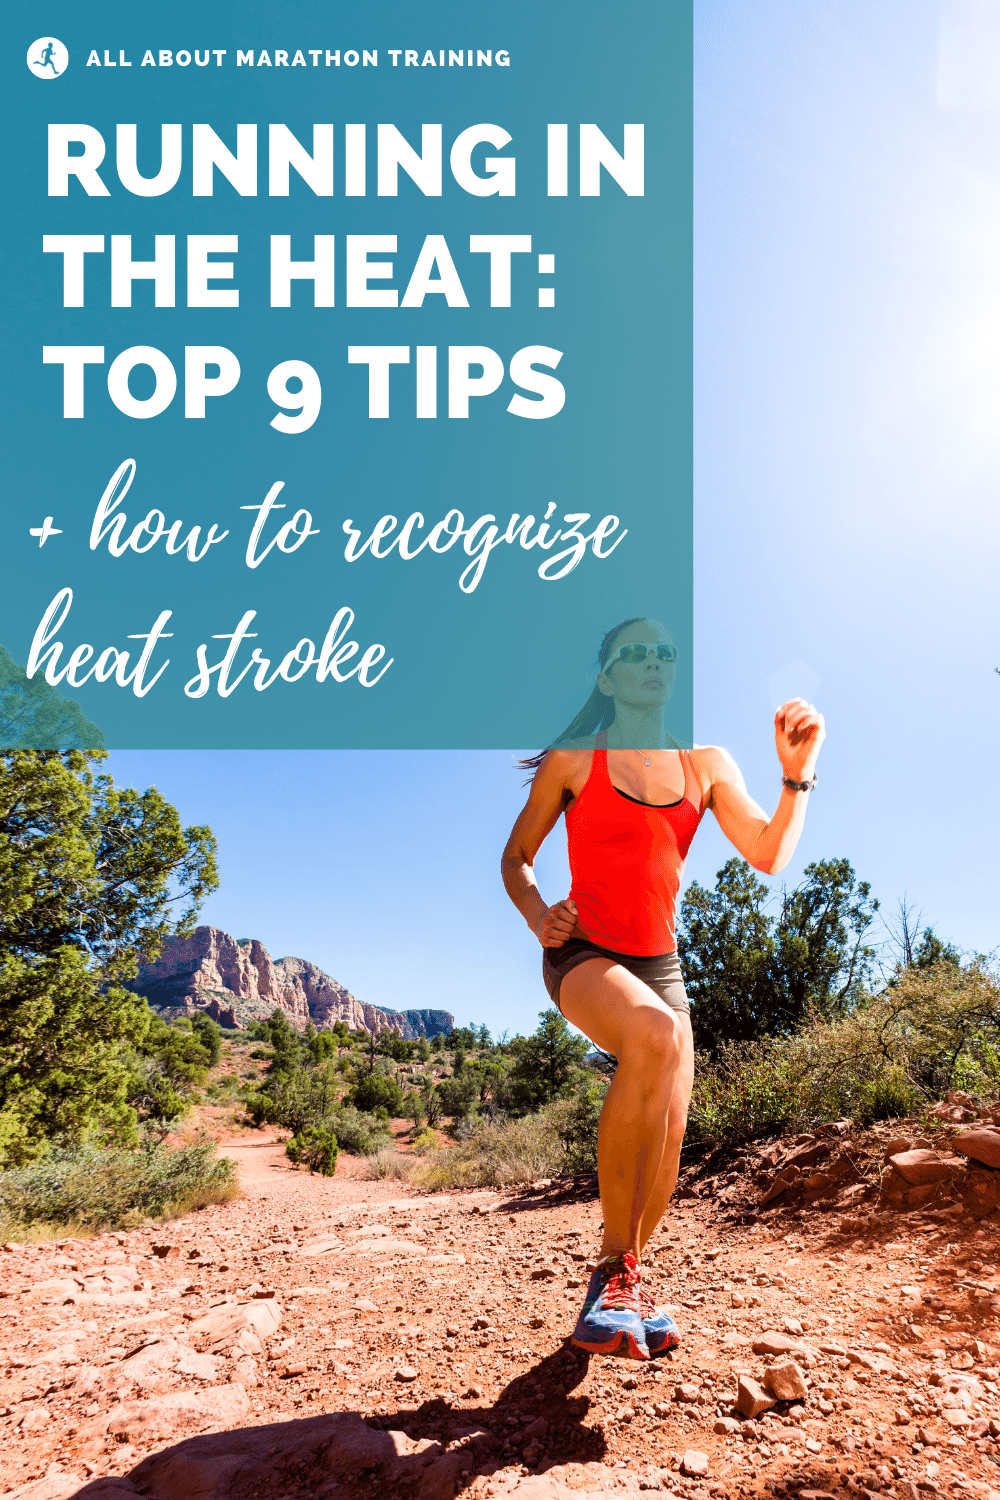 10 Top Tips for Running in the Heat